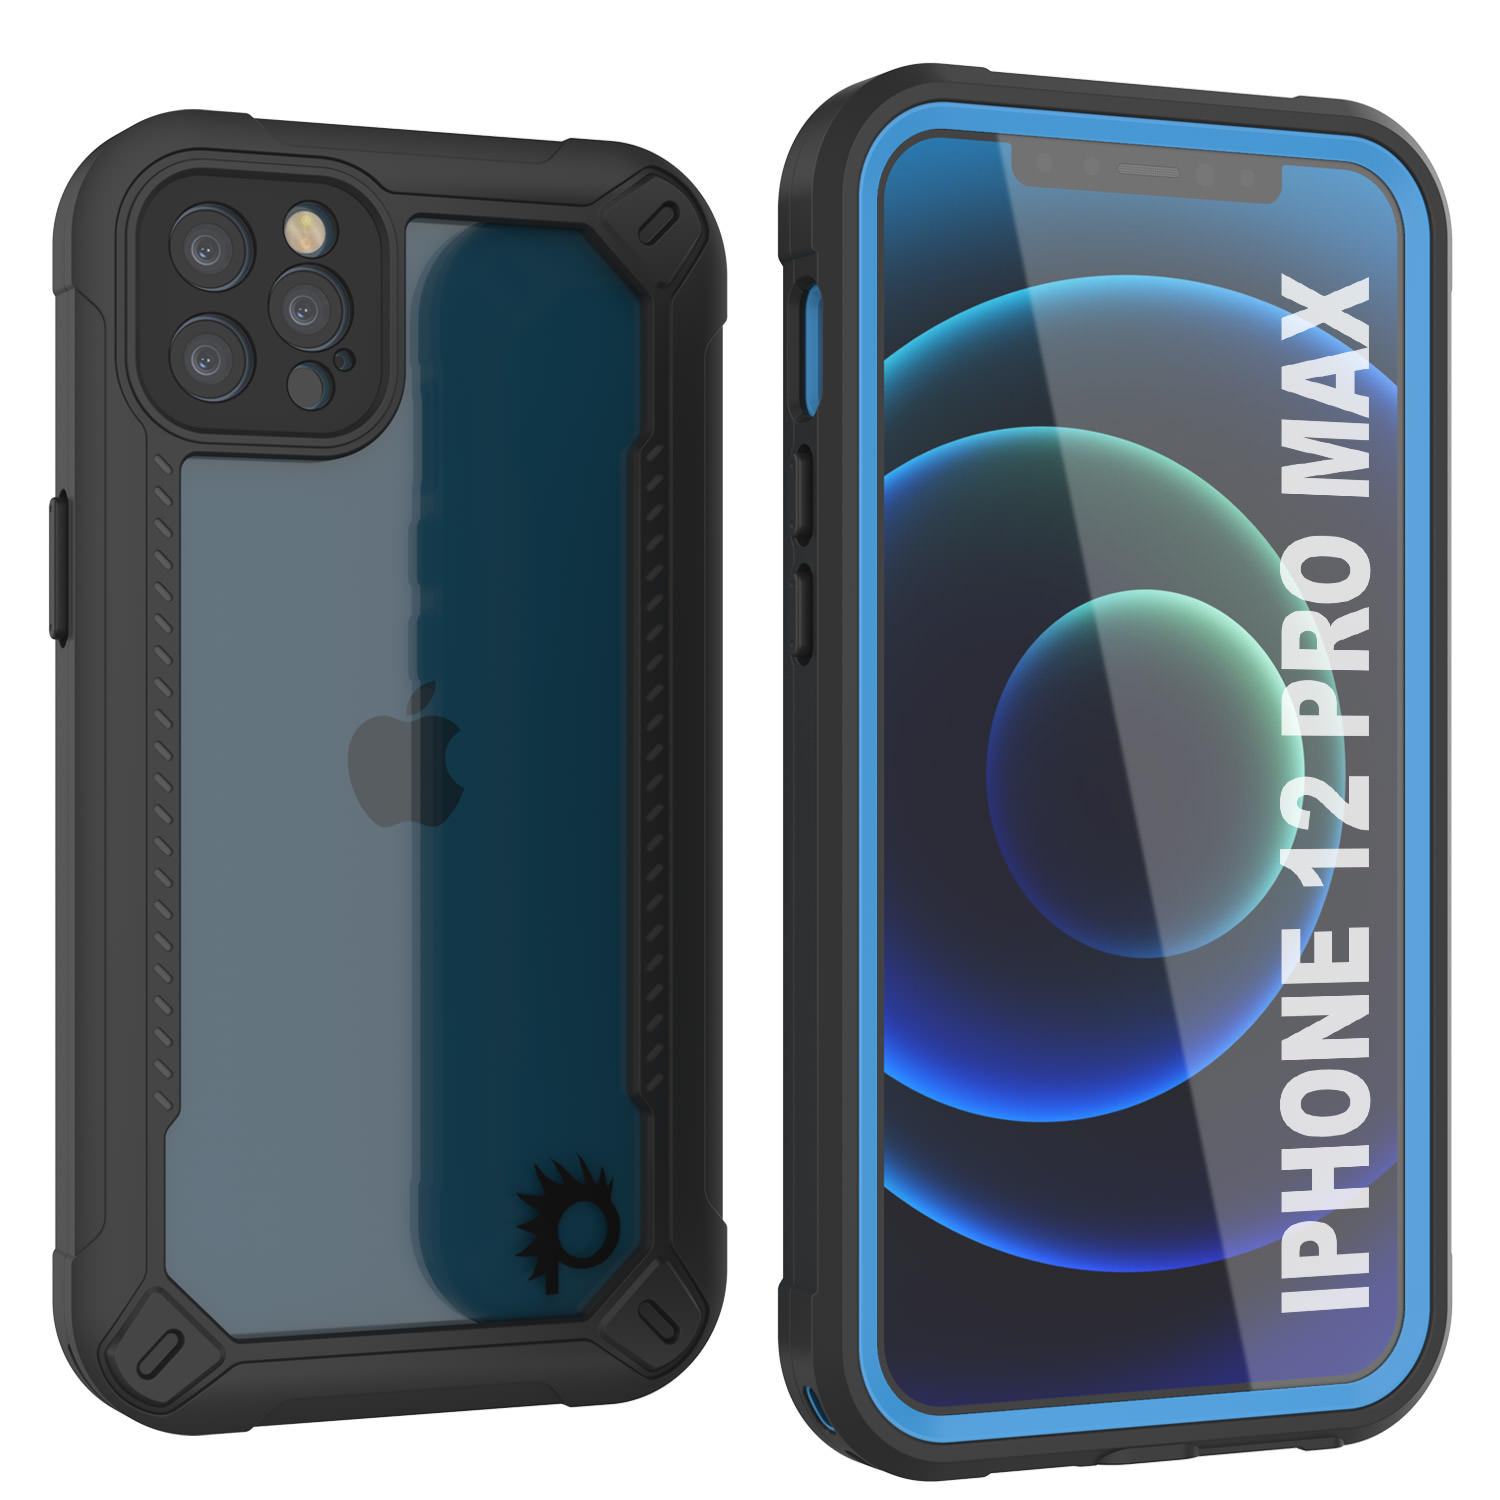 iPhone 12 Pro Max Waterproof IP68 Case, Punkcase [Blue]  [Maximus Series] [Slim Fit] [IP68 Certified] [Shockresistant] Clear Armor Cover with Screen Protector | Ultimate Protection (Color in image: blue)